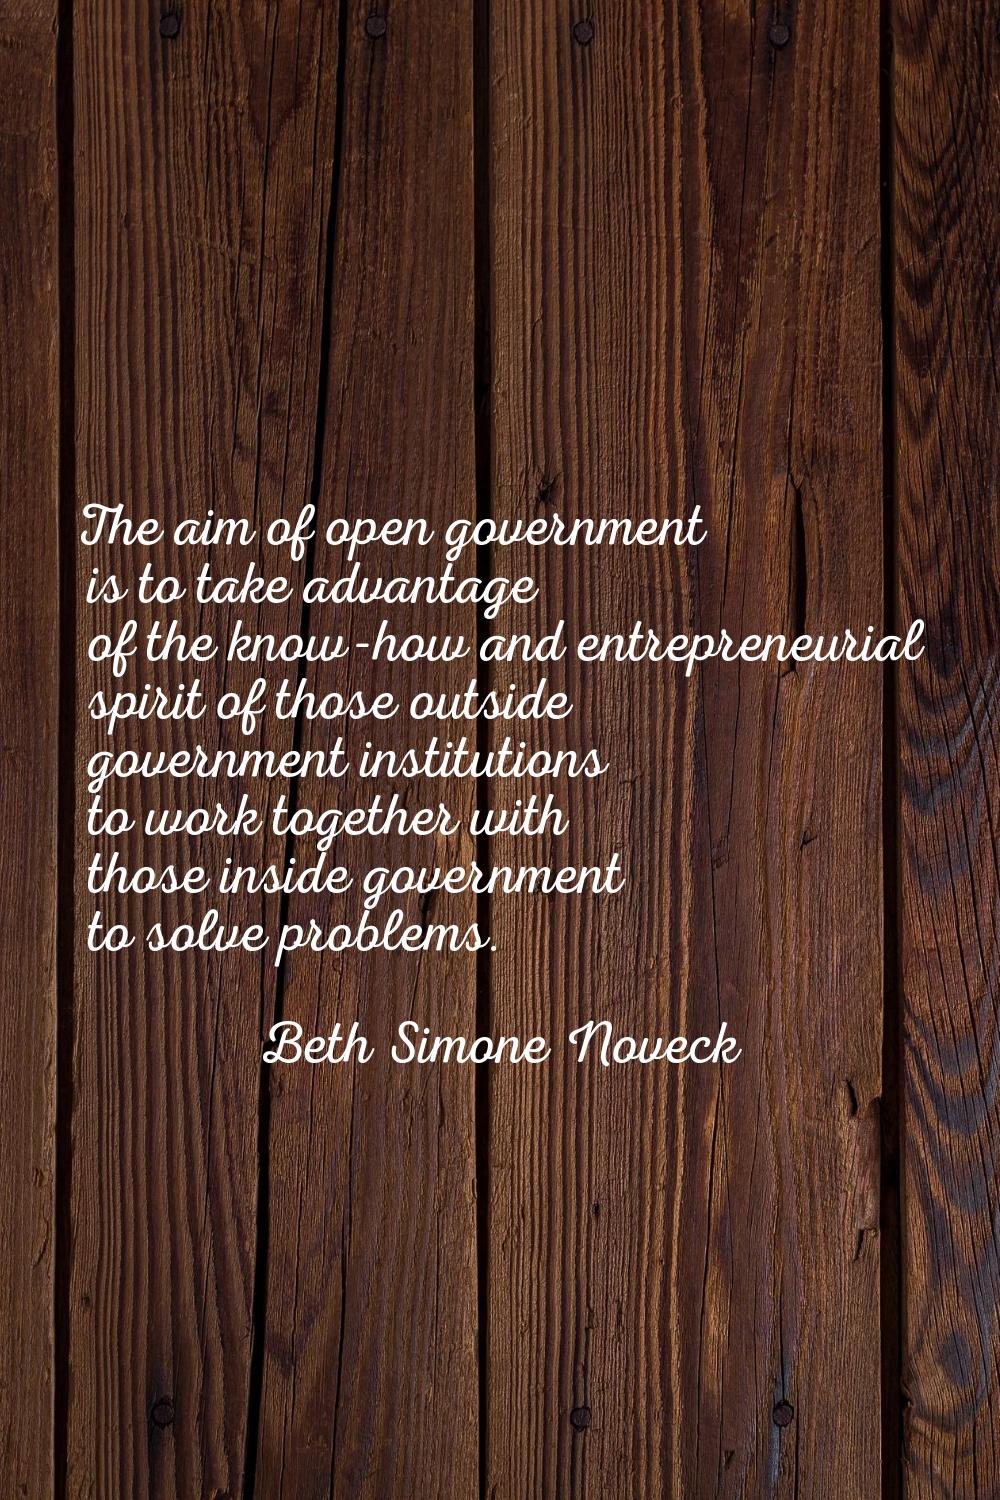 The aim of open government is to take advantage of the know-how and entrepreneurial spirit of those